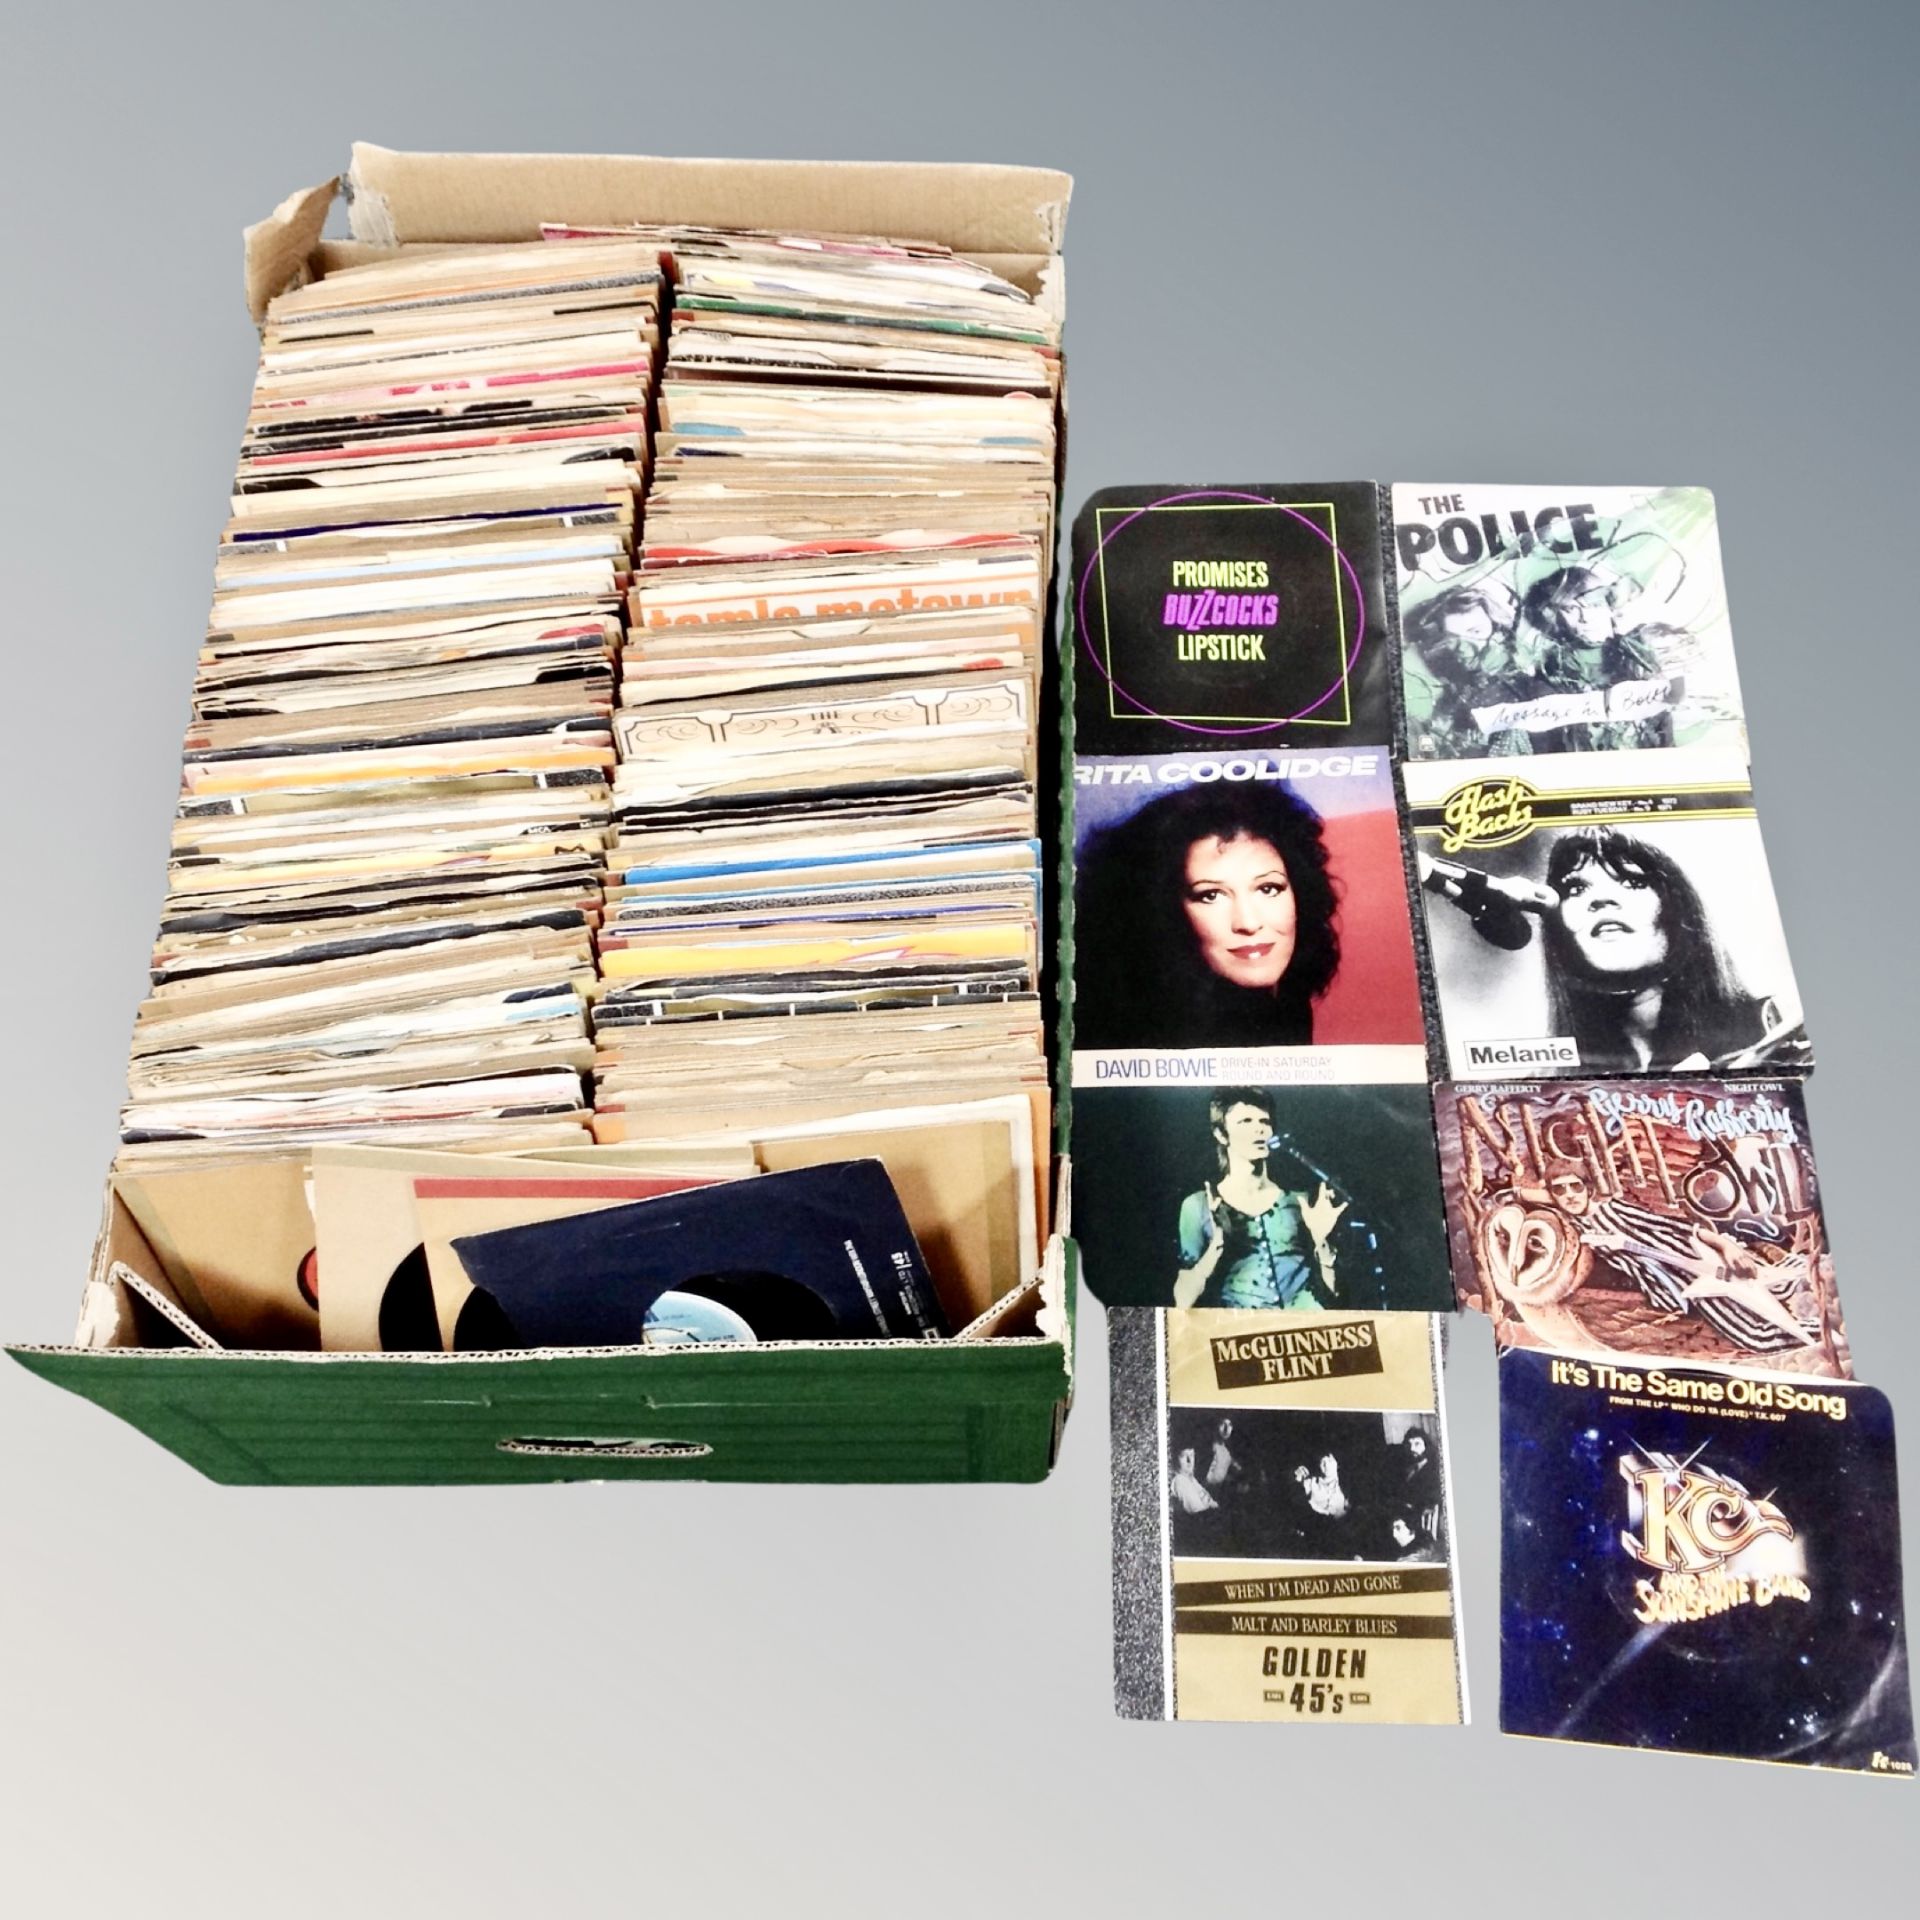 A box of large quantity of mid 20th century and later vinyl 7" singles to include The Buzzcocks,